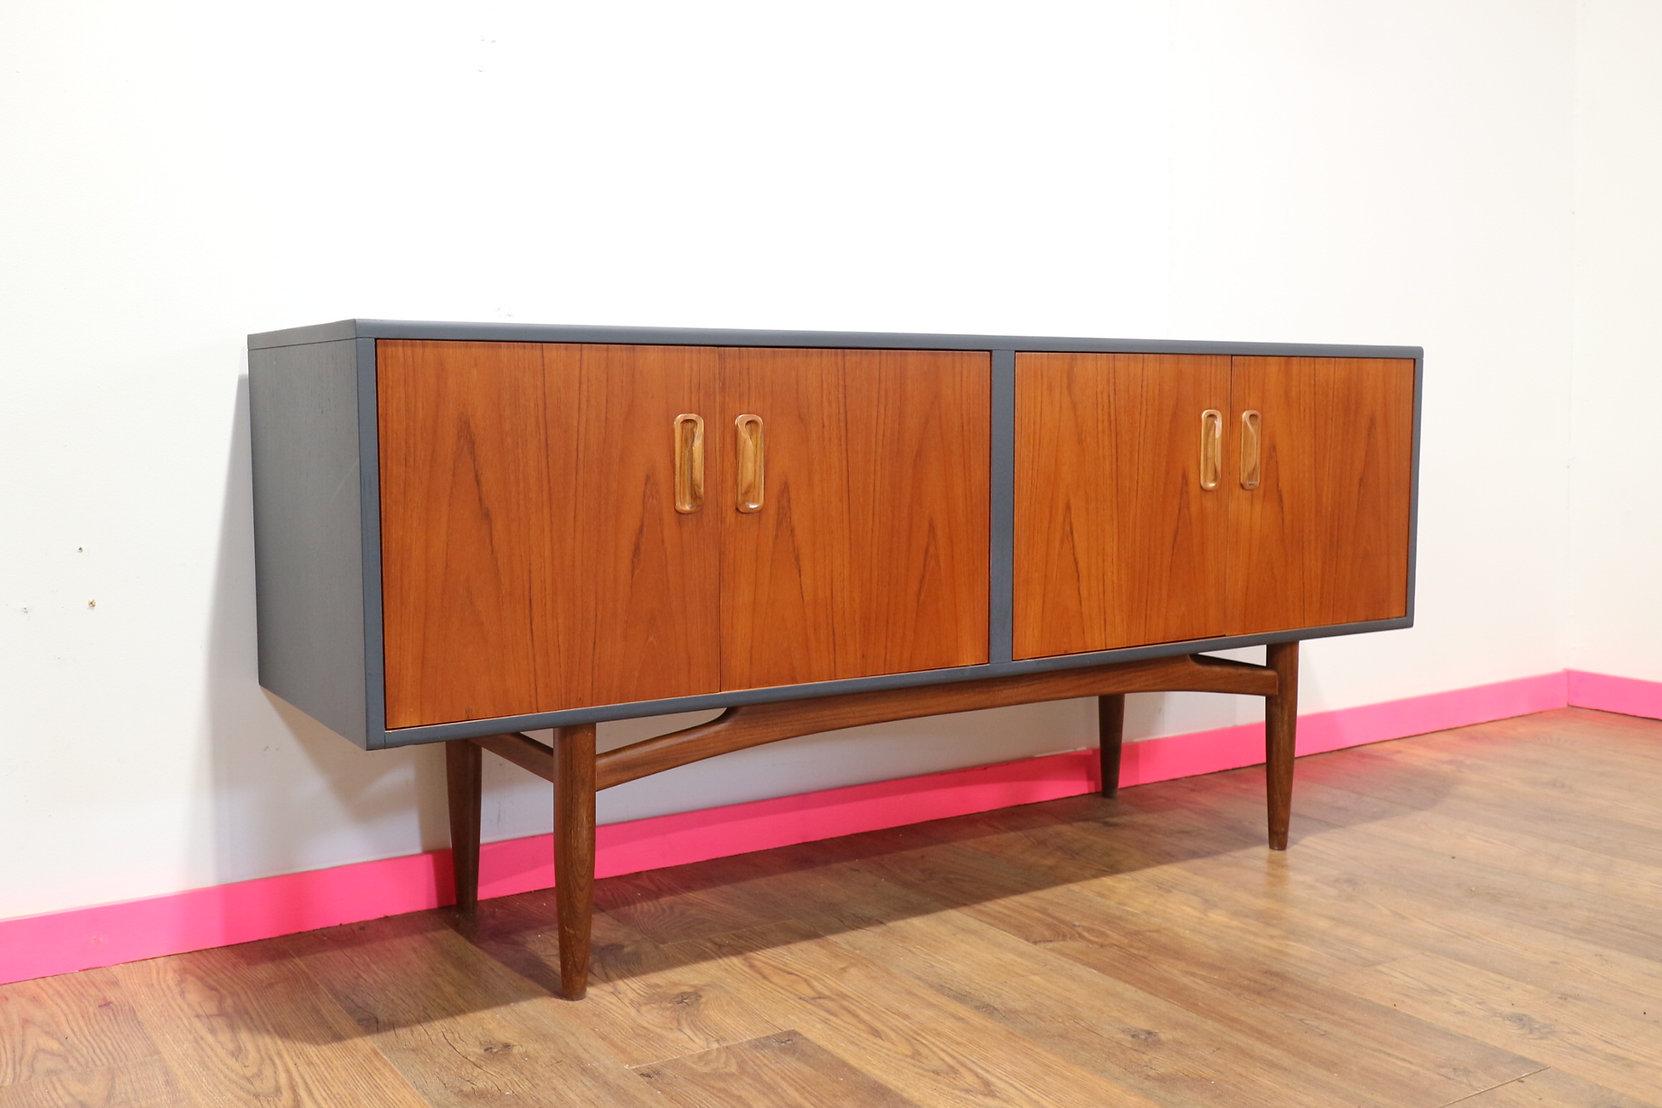 A stunning credenza made by British company G plan as part of their fresco range. This cabinet has been painted grey on the outer case thats contrasts beautifully with the teak doors and legs. A fantastic piece of furniture and great for